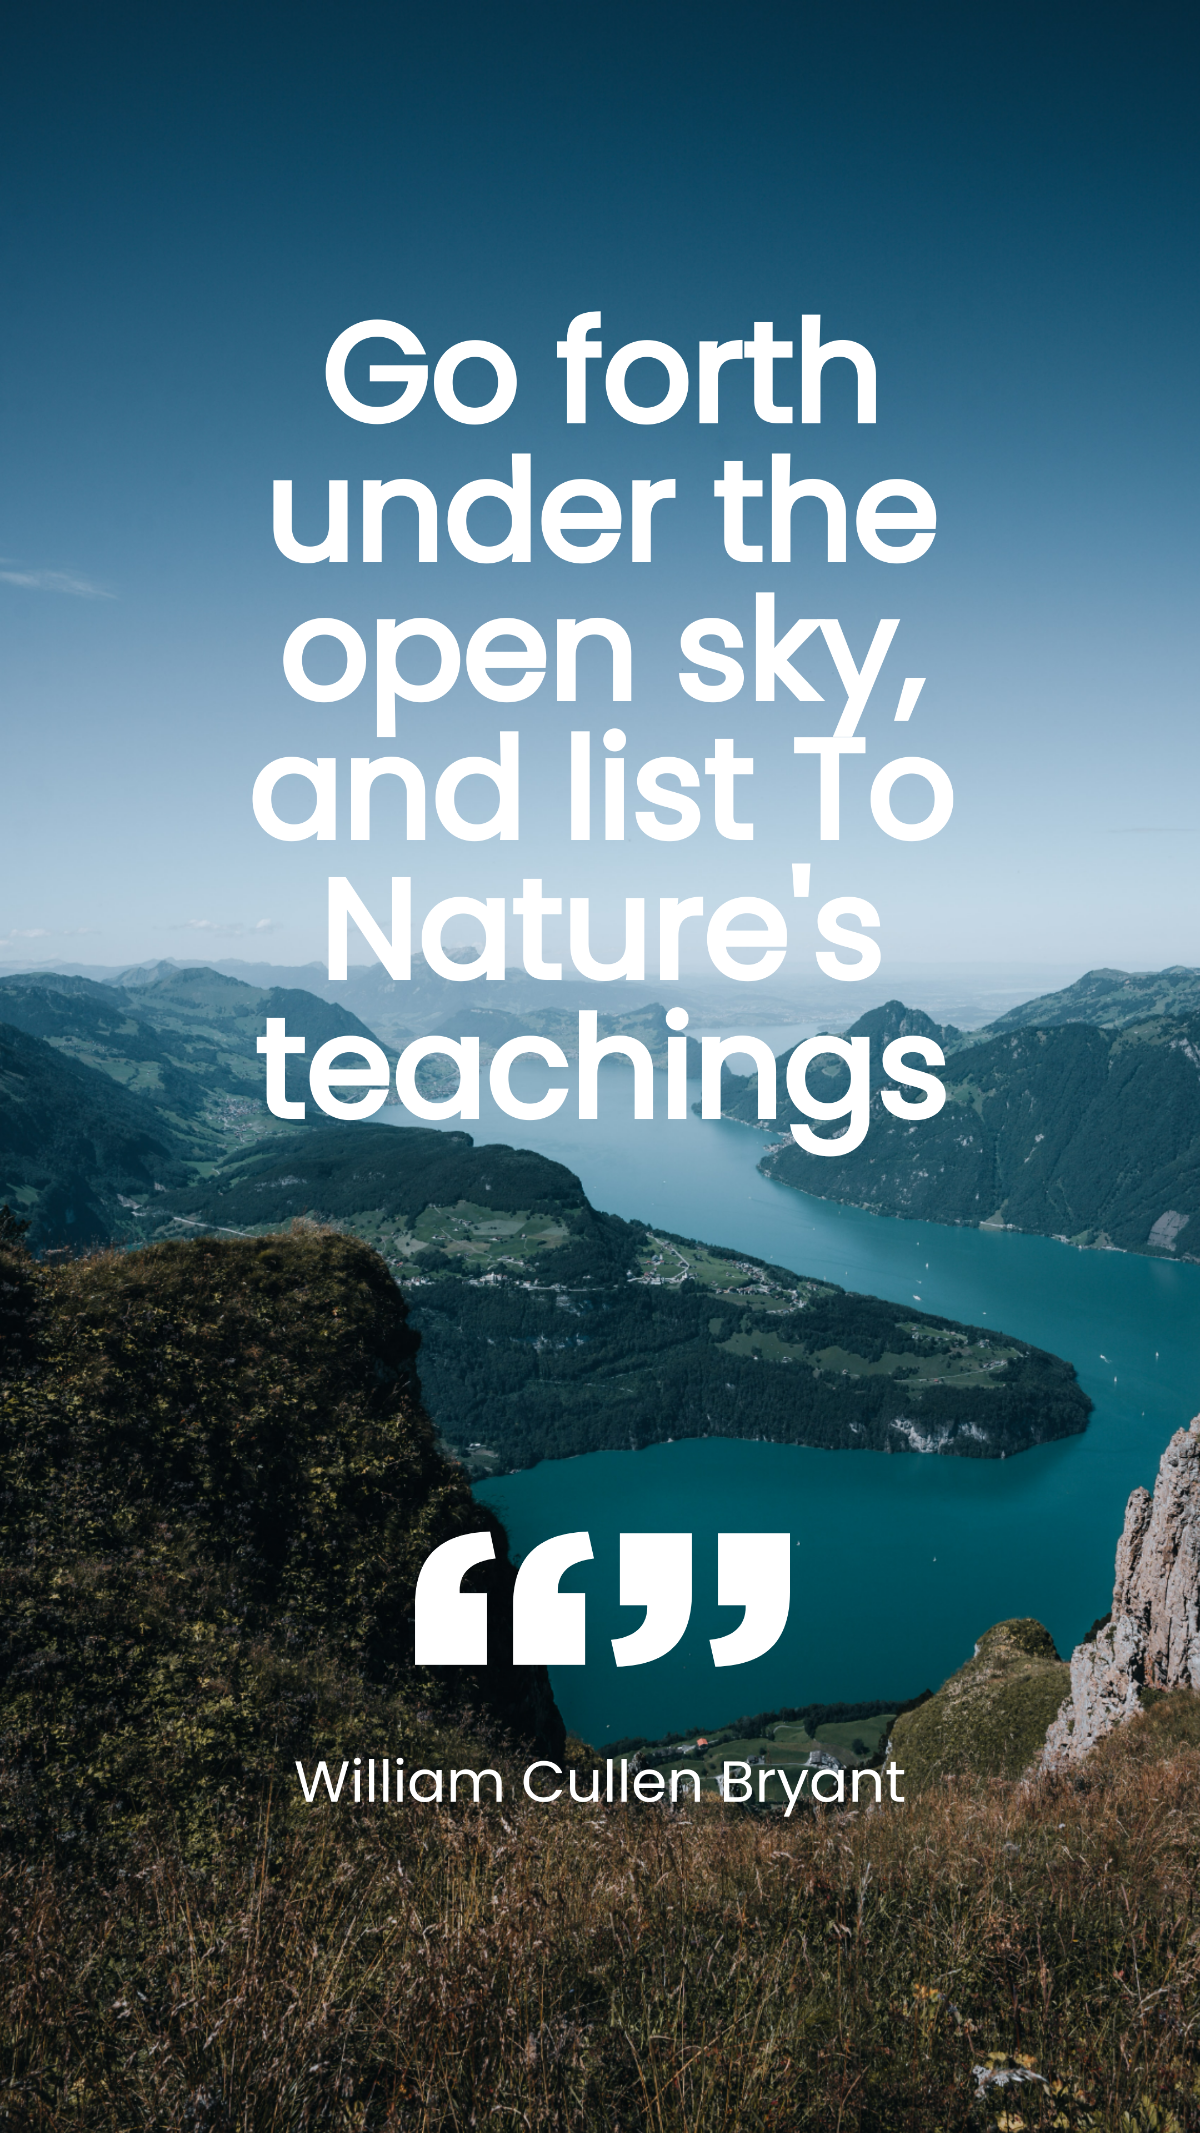 William Cullen Bryant - Go forth under the open sky, and list To Nature's teachings. Template